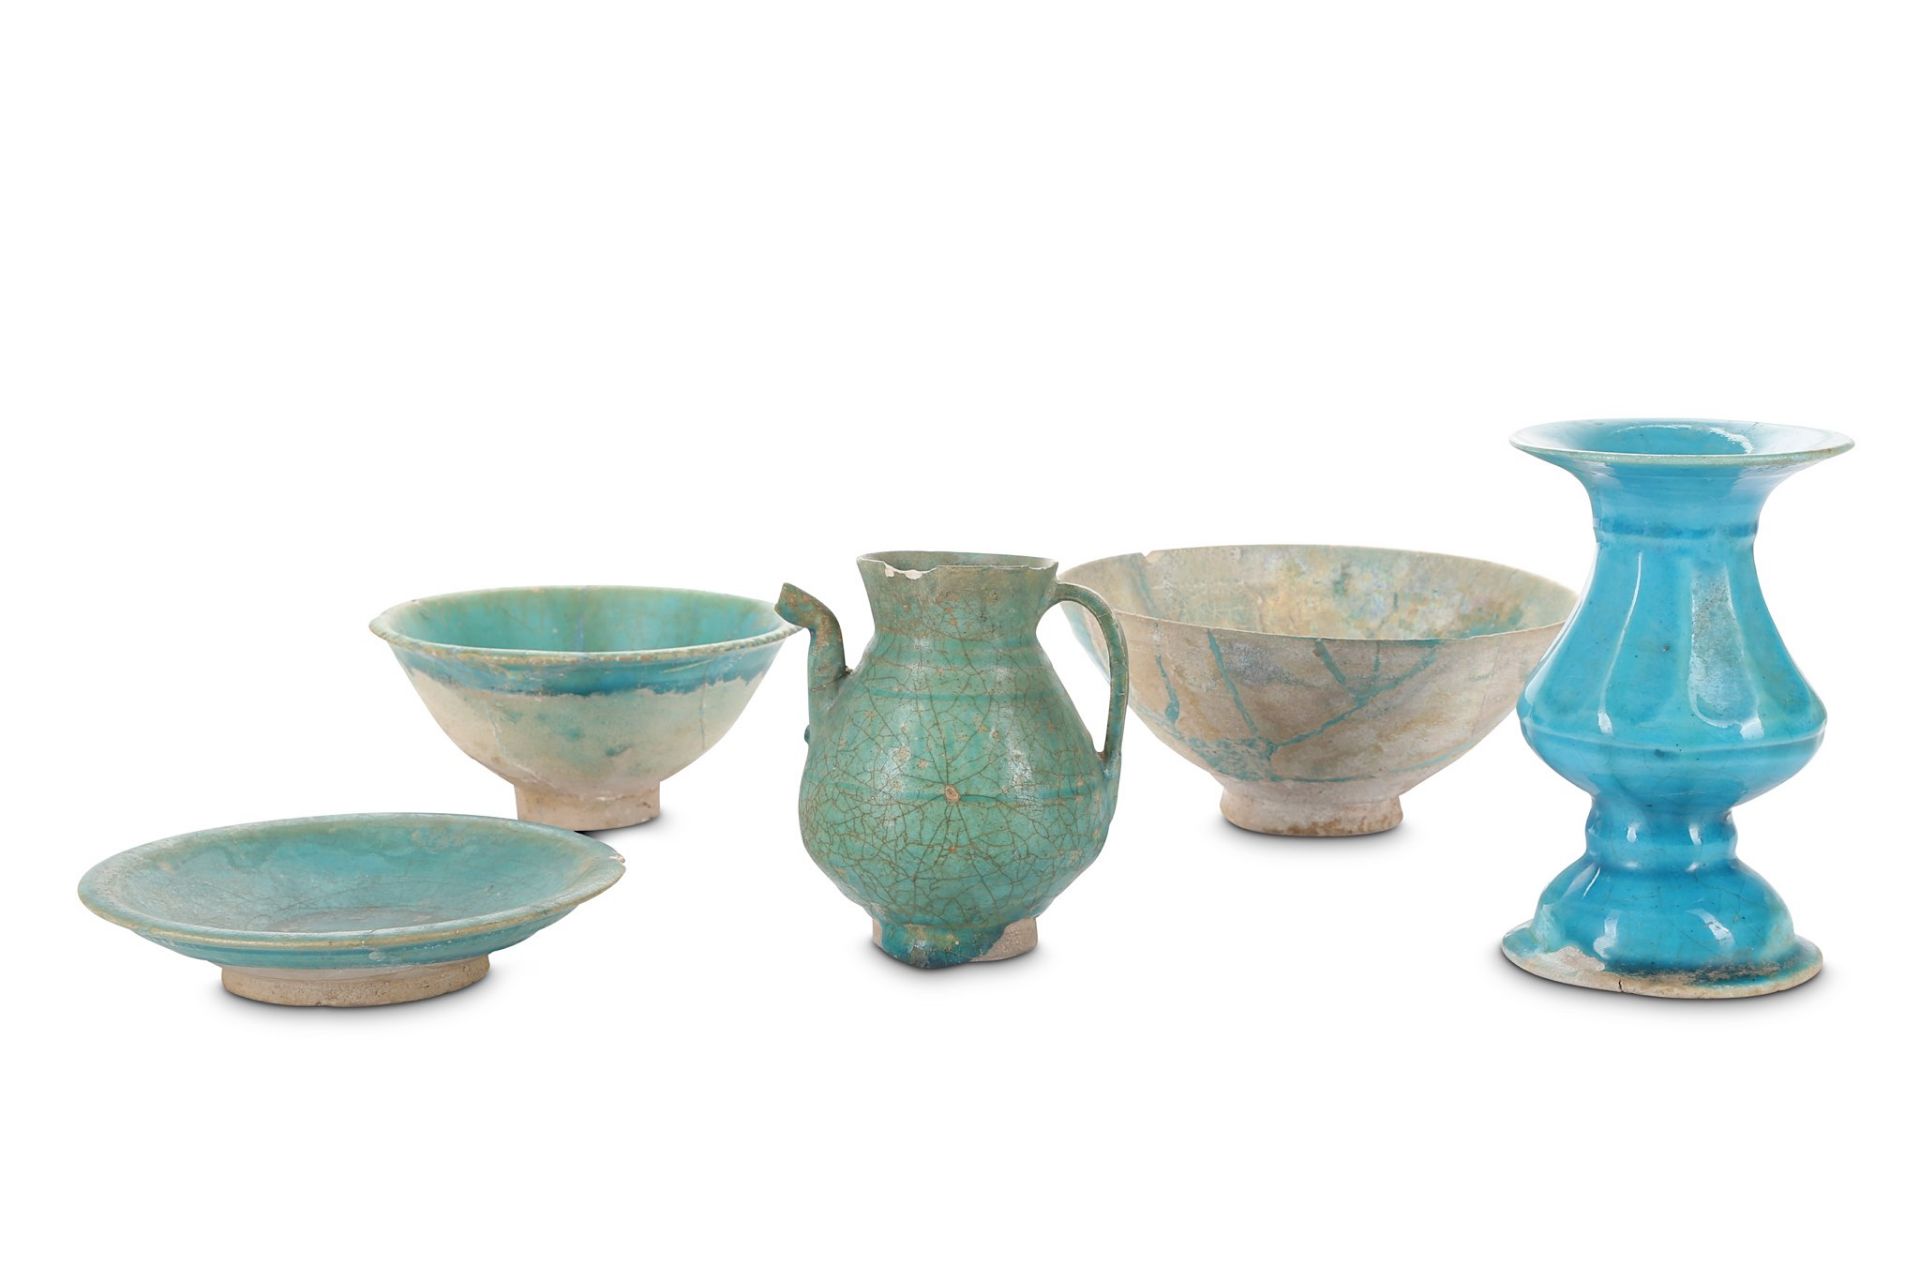 A GROUP OF FIVE TURQUOISE-GLAZED CERAMICS Possibly Kashan, Iran, 12th - 13th century  Comprising two